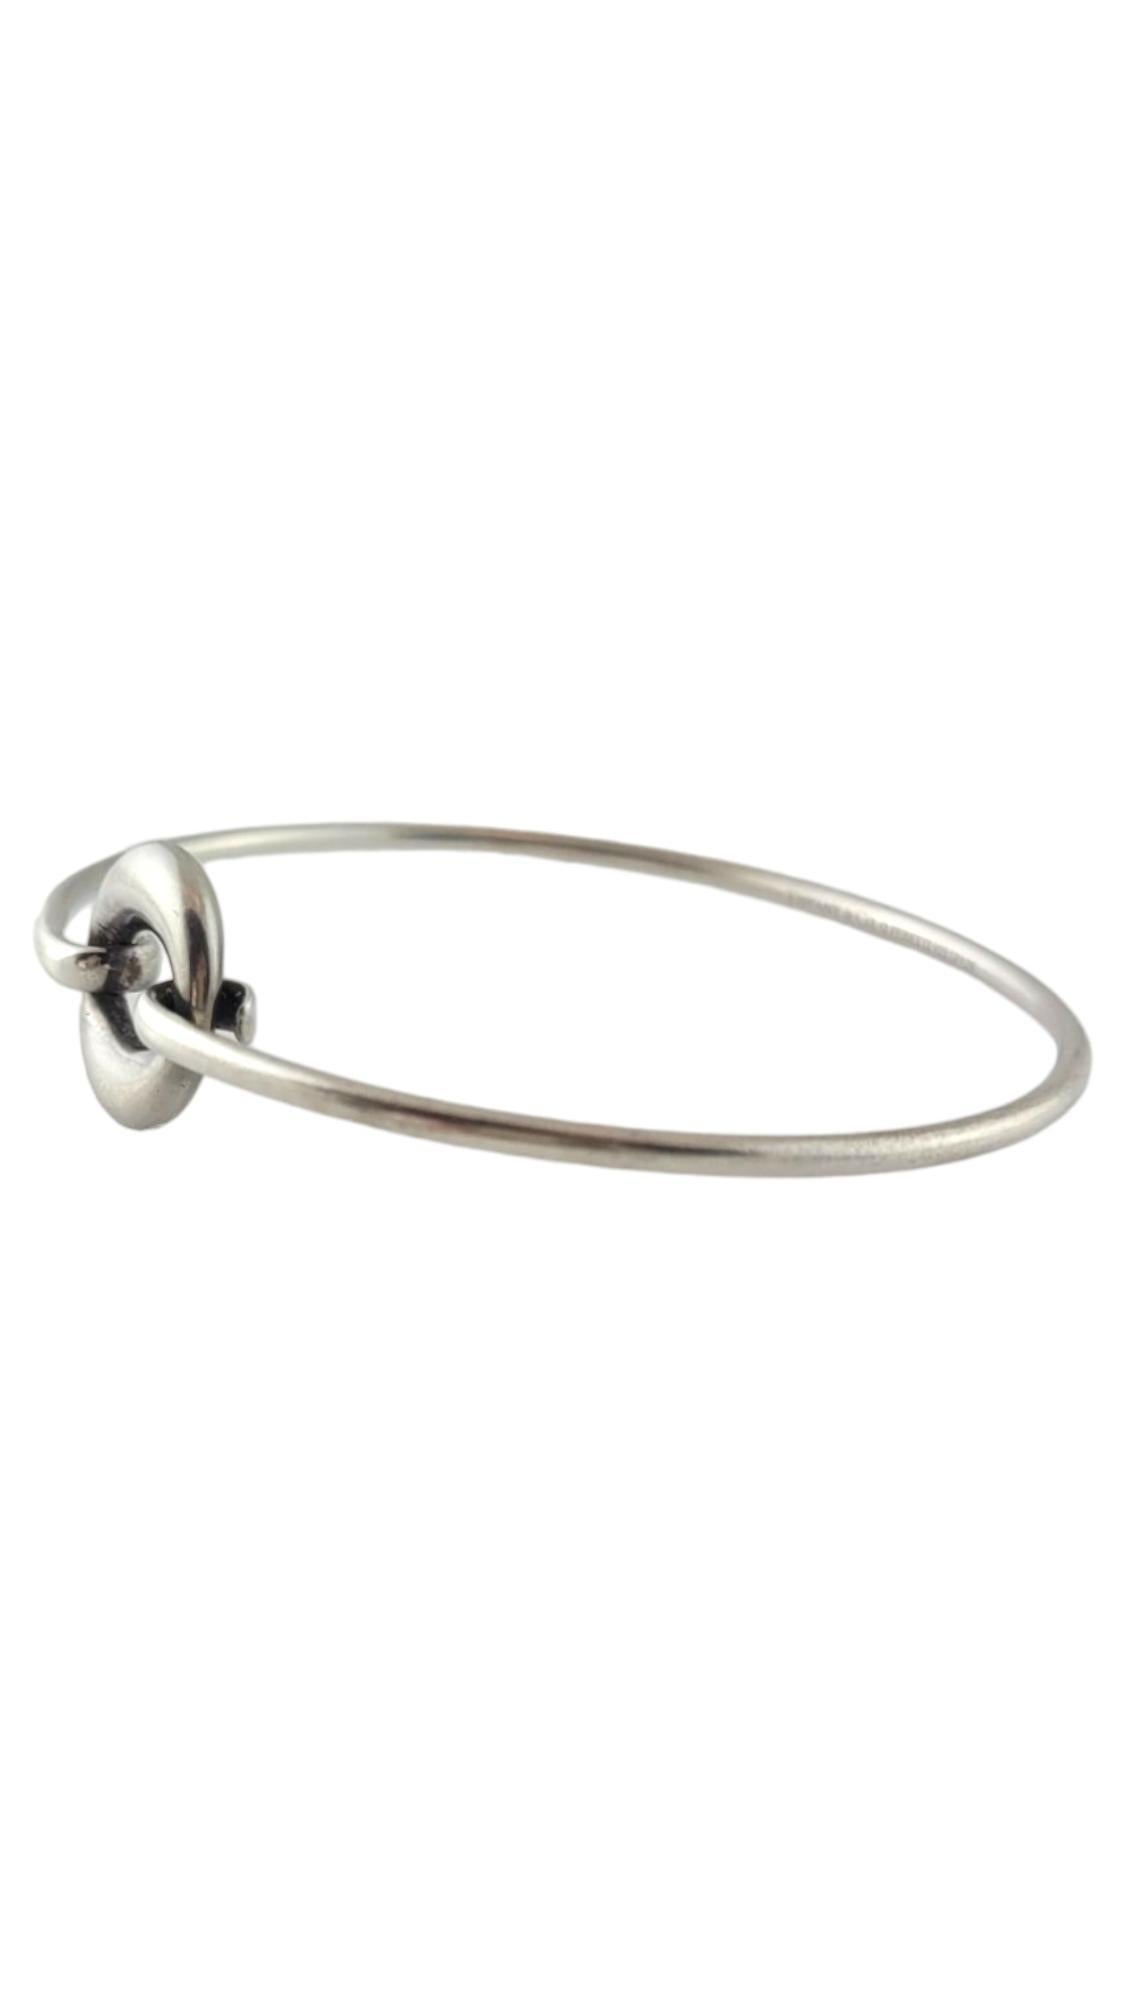 Vintage Tiffany & Co. Sterling Silver Sevillana Peretti Bangle Bracelet

This gorgeous bangle bracelet by designer Tiffany & Co. is crafted from sterling silver for a beautiful finish!

Size: 5.75